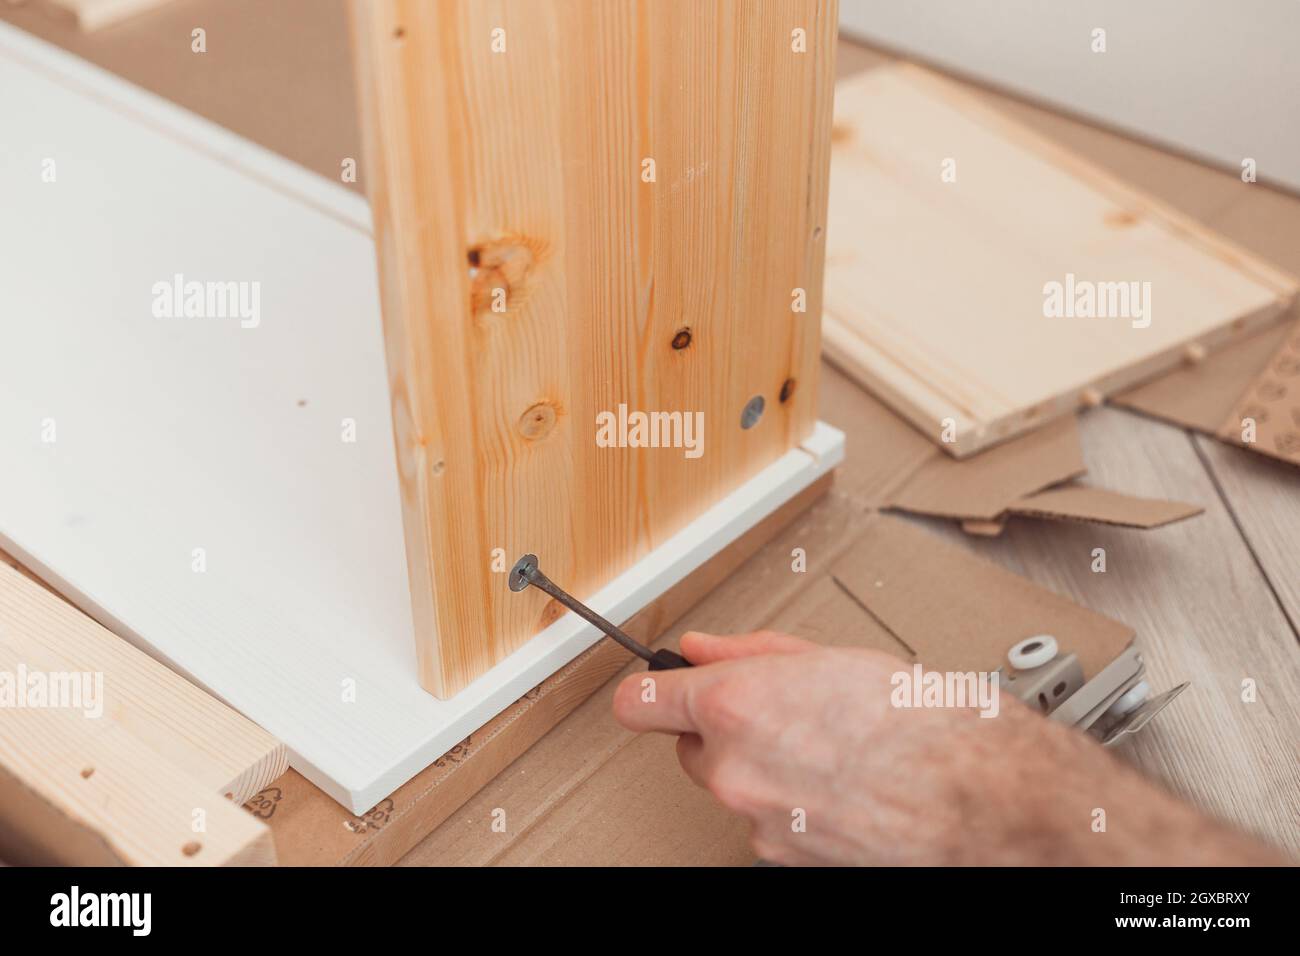 Assembling wooden furniture manually with screwdriwer. Stock Photo